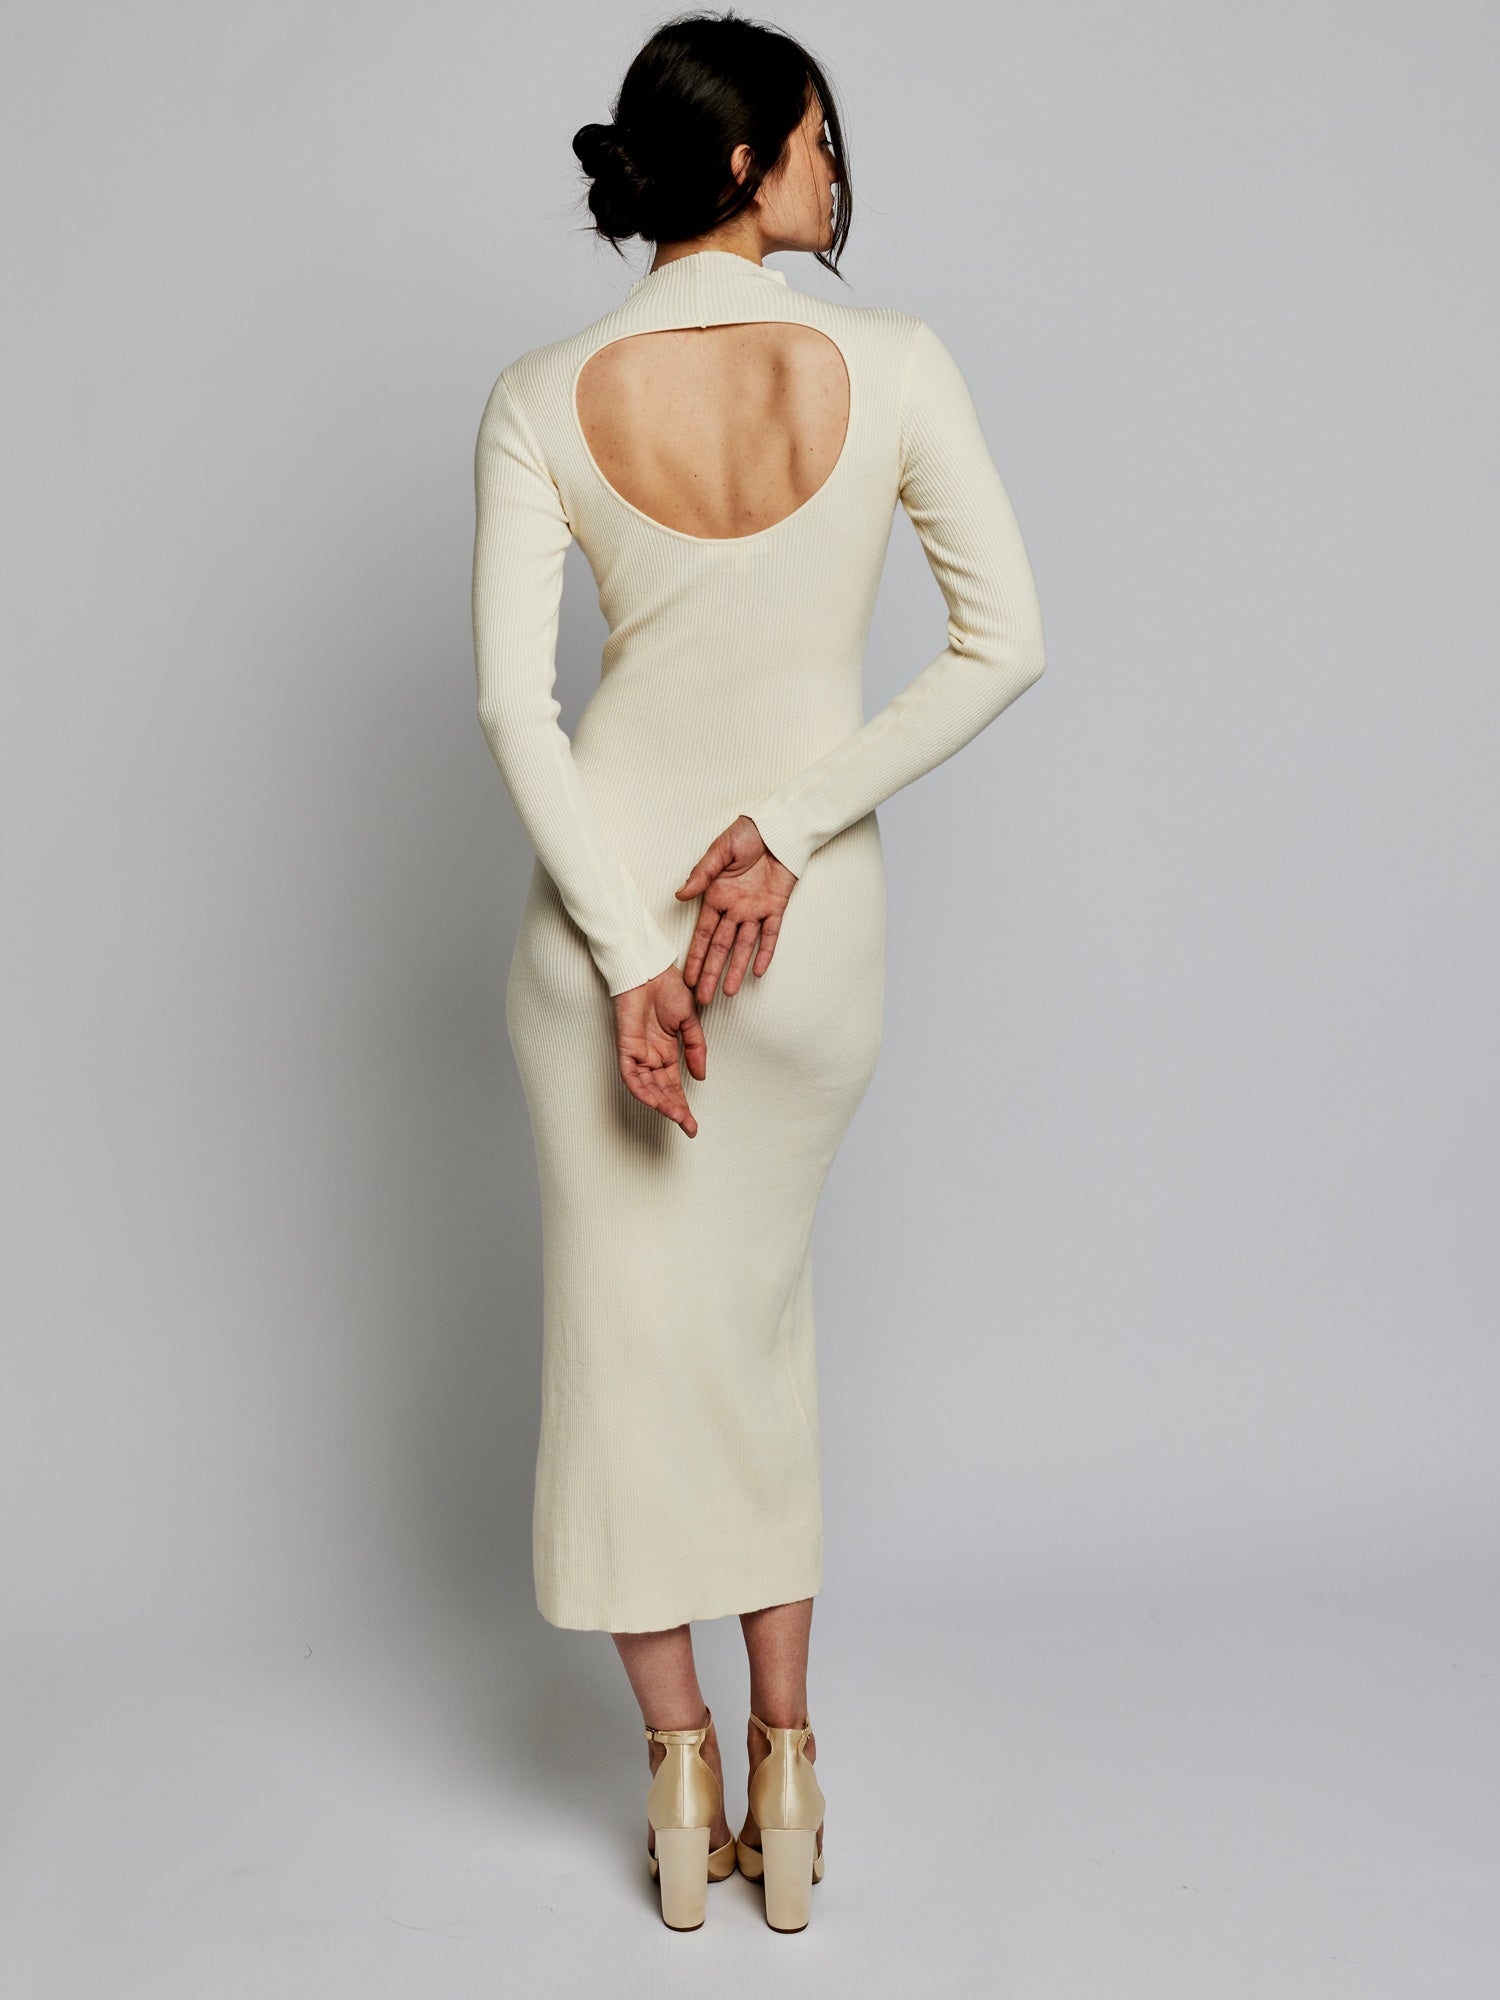 long sleeve, midi dress with a mock turtleneck, ribbed detailing, side slit and back cut out in ivory